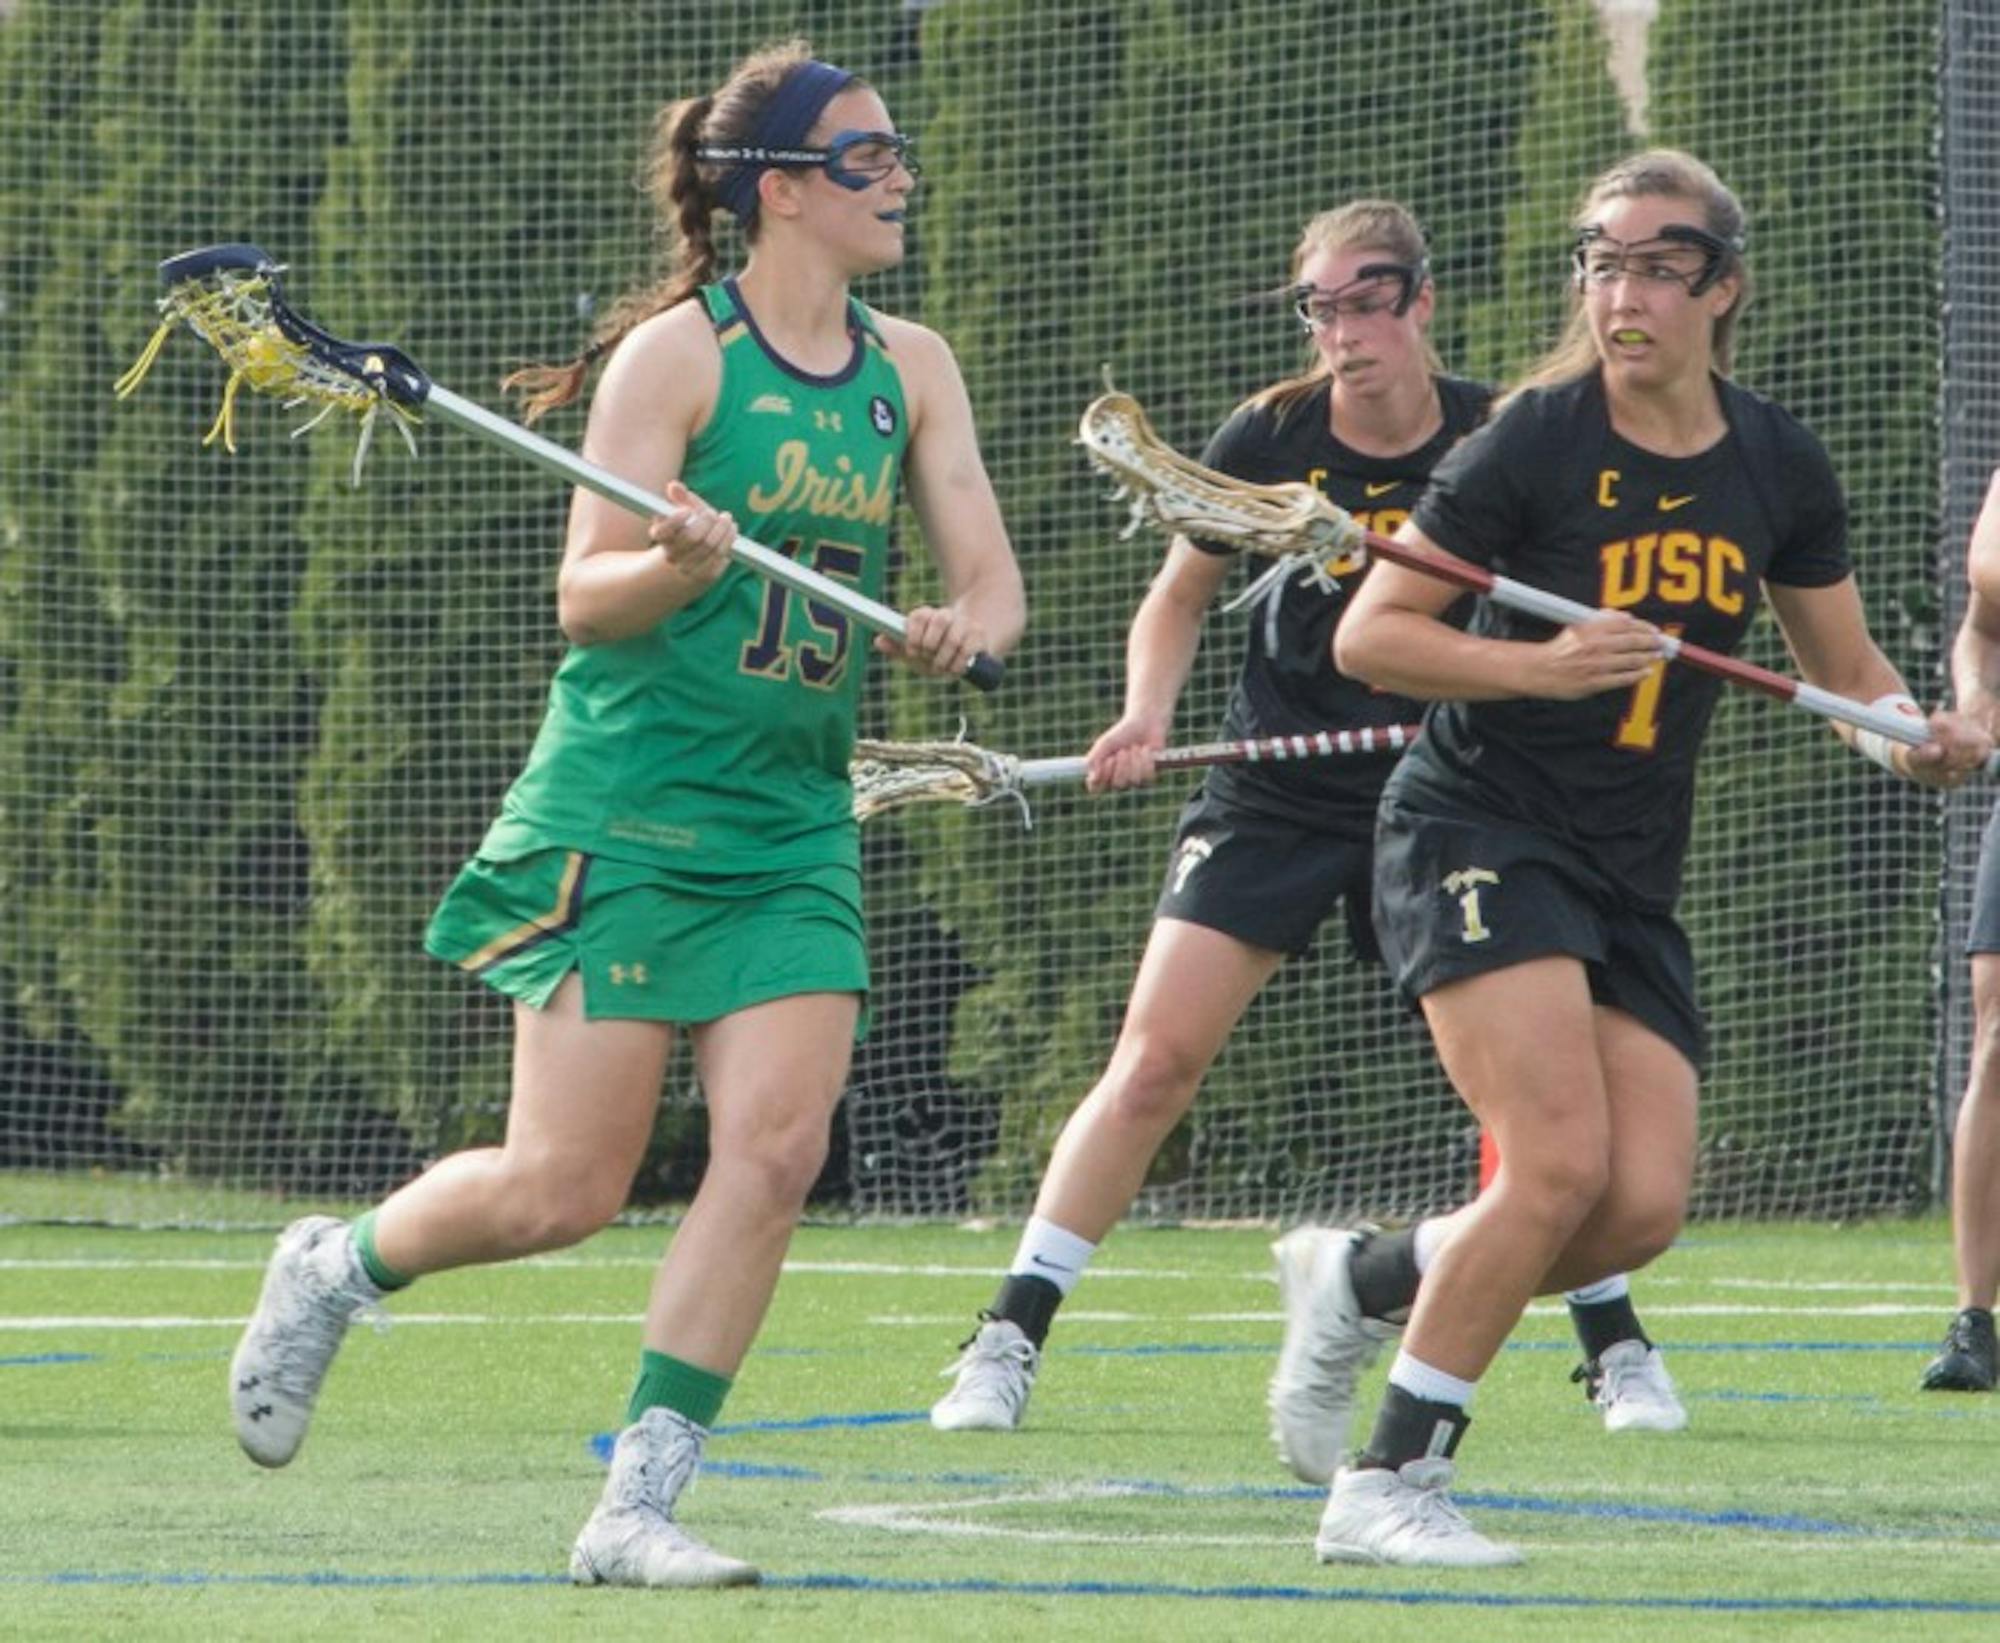 Irish junior attack Cortney Fortunato looks for the open pass during Notre Dame's 5-4 loss to USC on Monday at Arlotta Stadium.